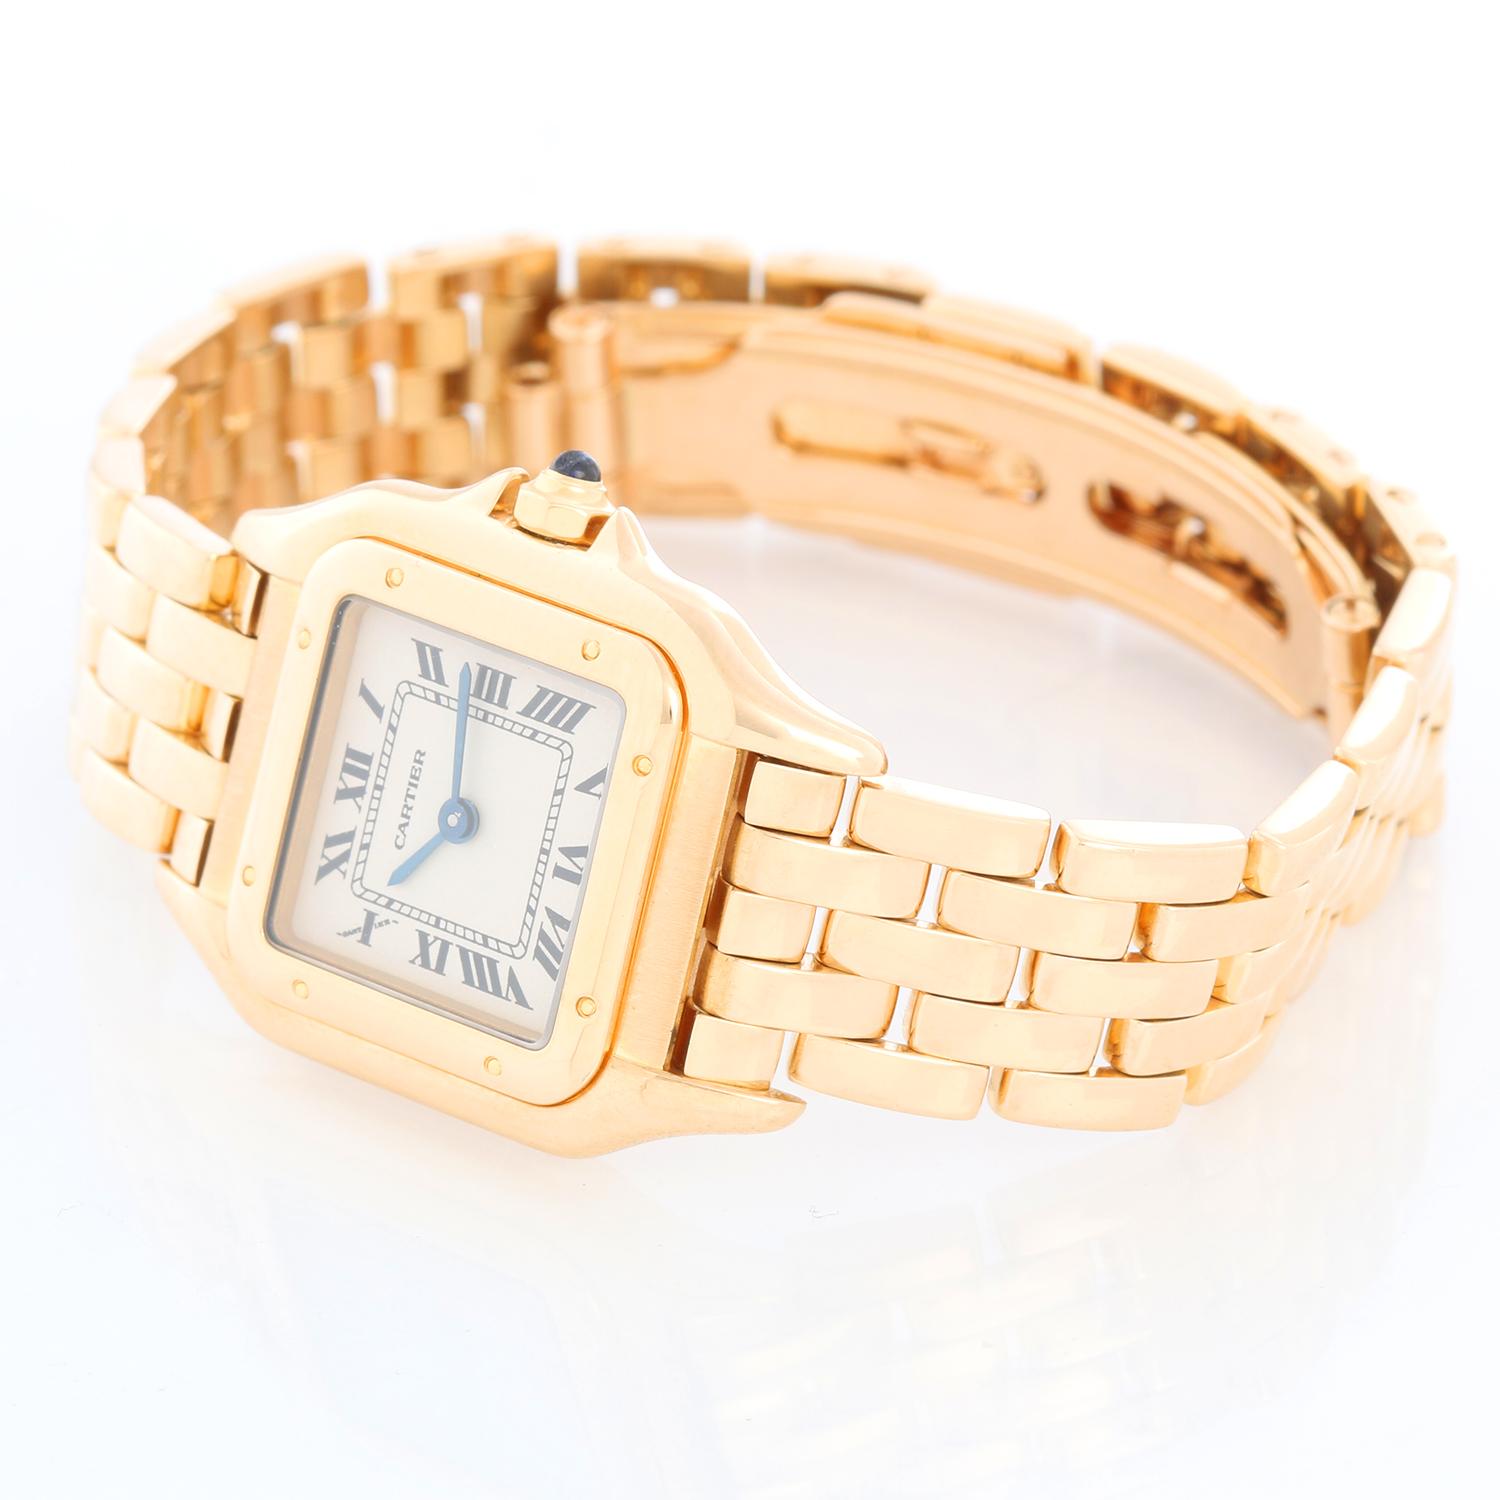 Cartier Panther Ladies 18k Yellow Gold Watch - Quartz. 18k yellow gold case (22mm x 30mm ). Ivory colored dial with black Roman numerals. 18k yellow gold Panther bracelet. Pre-owned with custom box.